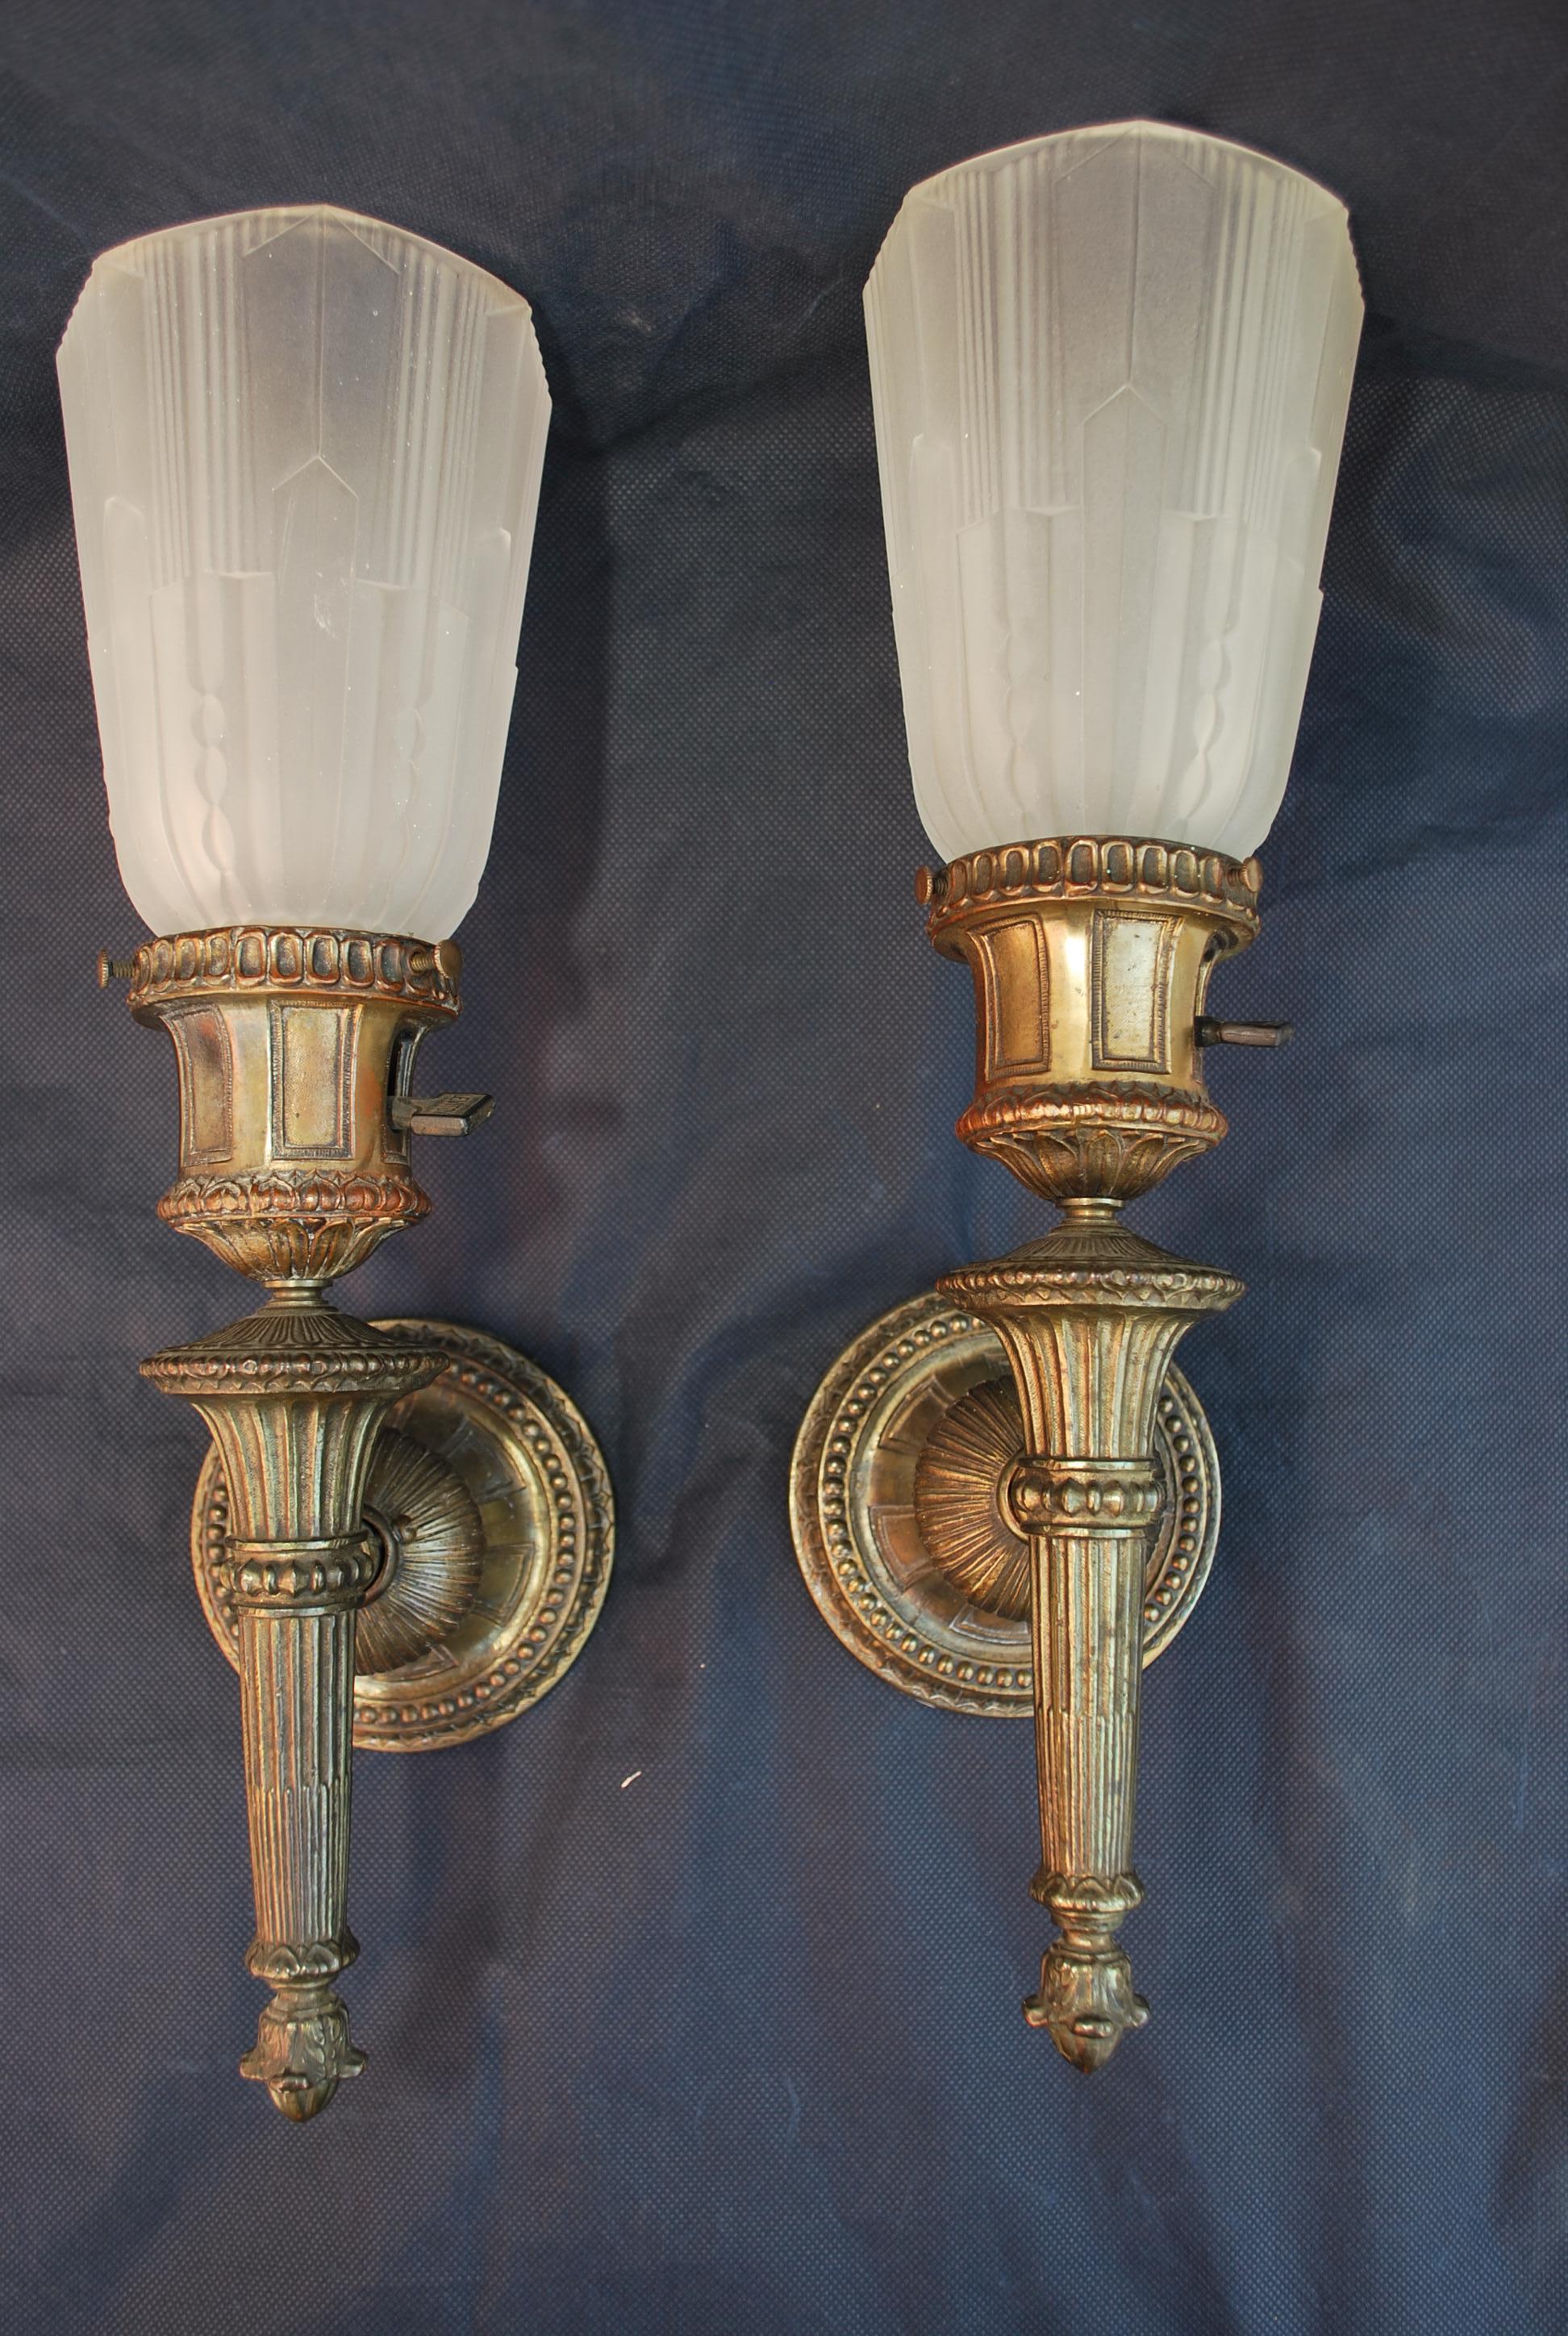 An elegant pair of 1920's silver plated sconces, the patina is much nicer in person